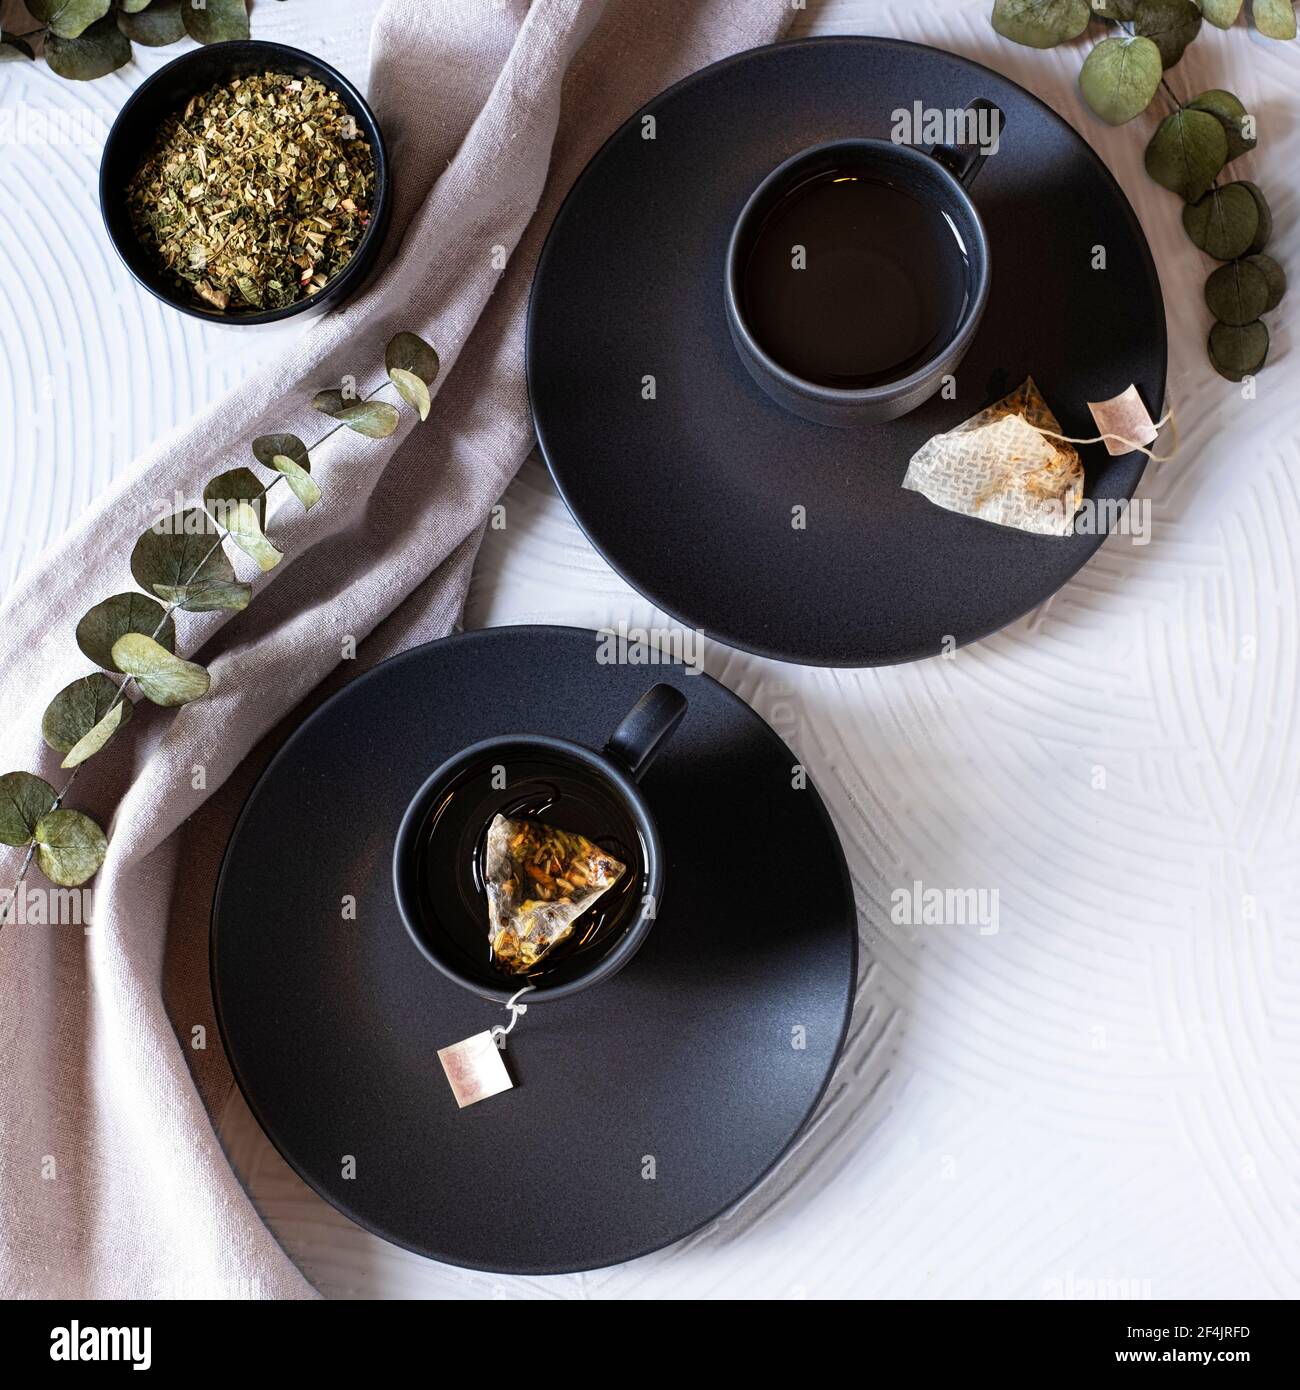 Two identical black tea cups on clay surrounded by eucalyptus branches on a white background Stock Photo